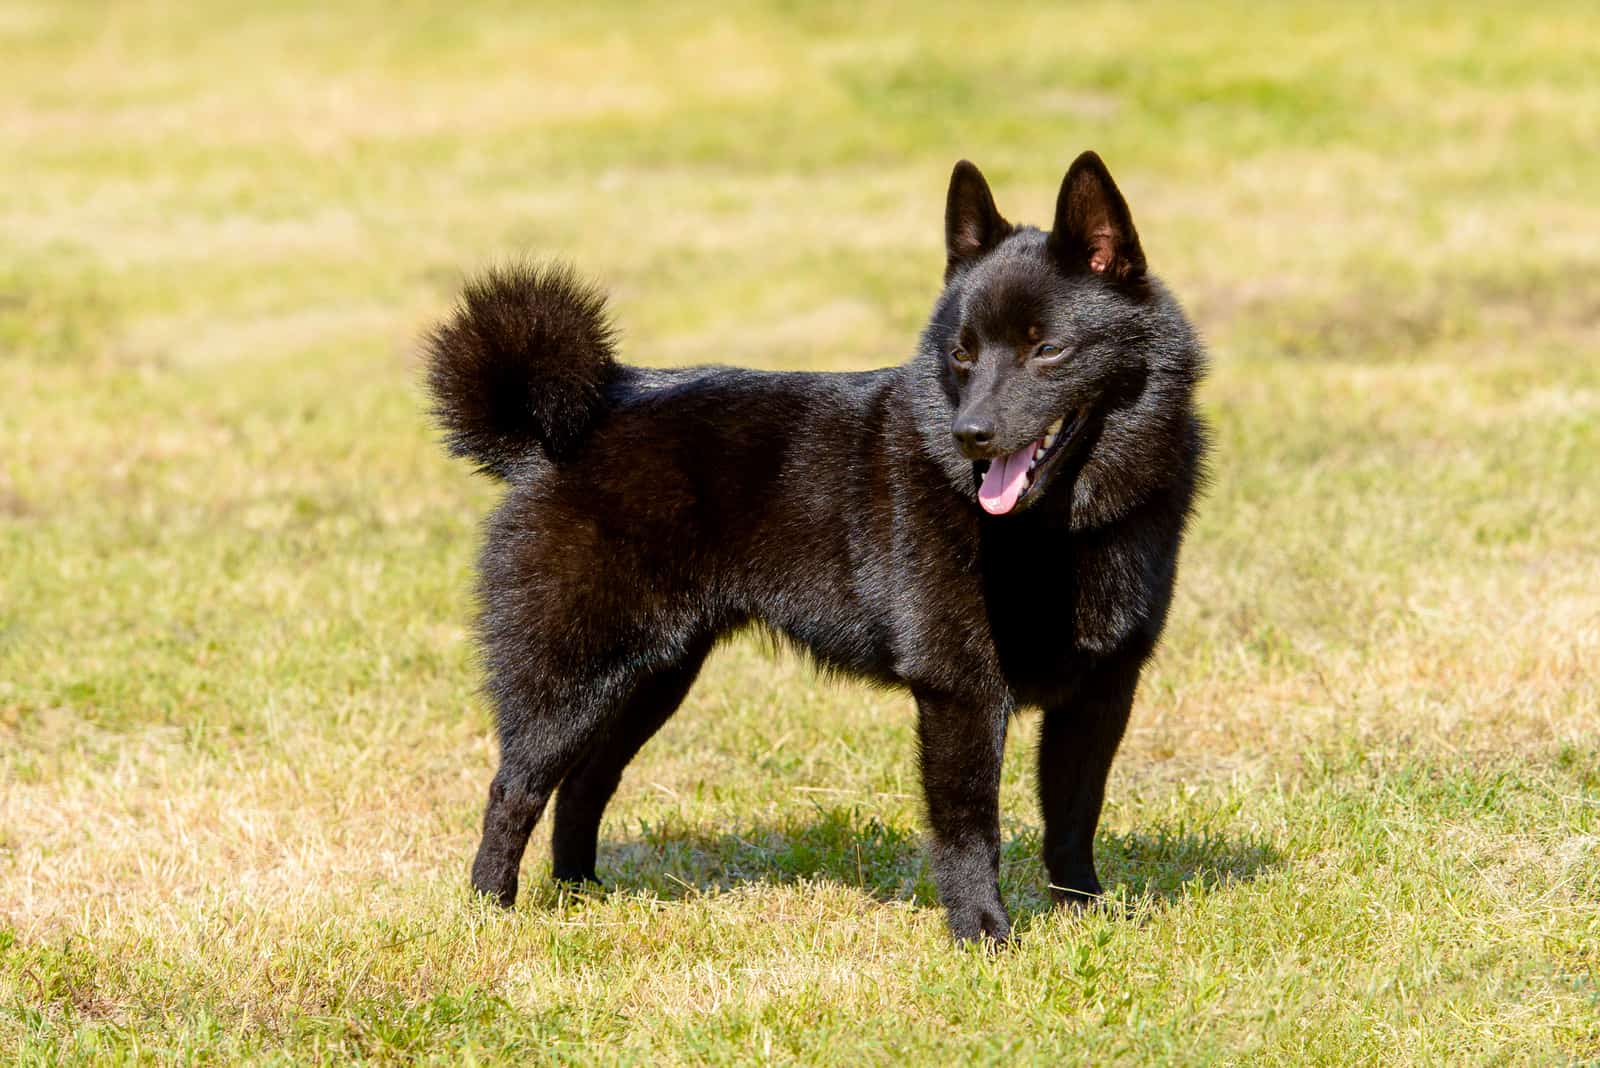 Schipperke looks aside and stands on the grass